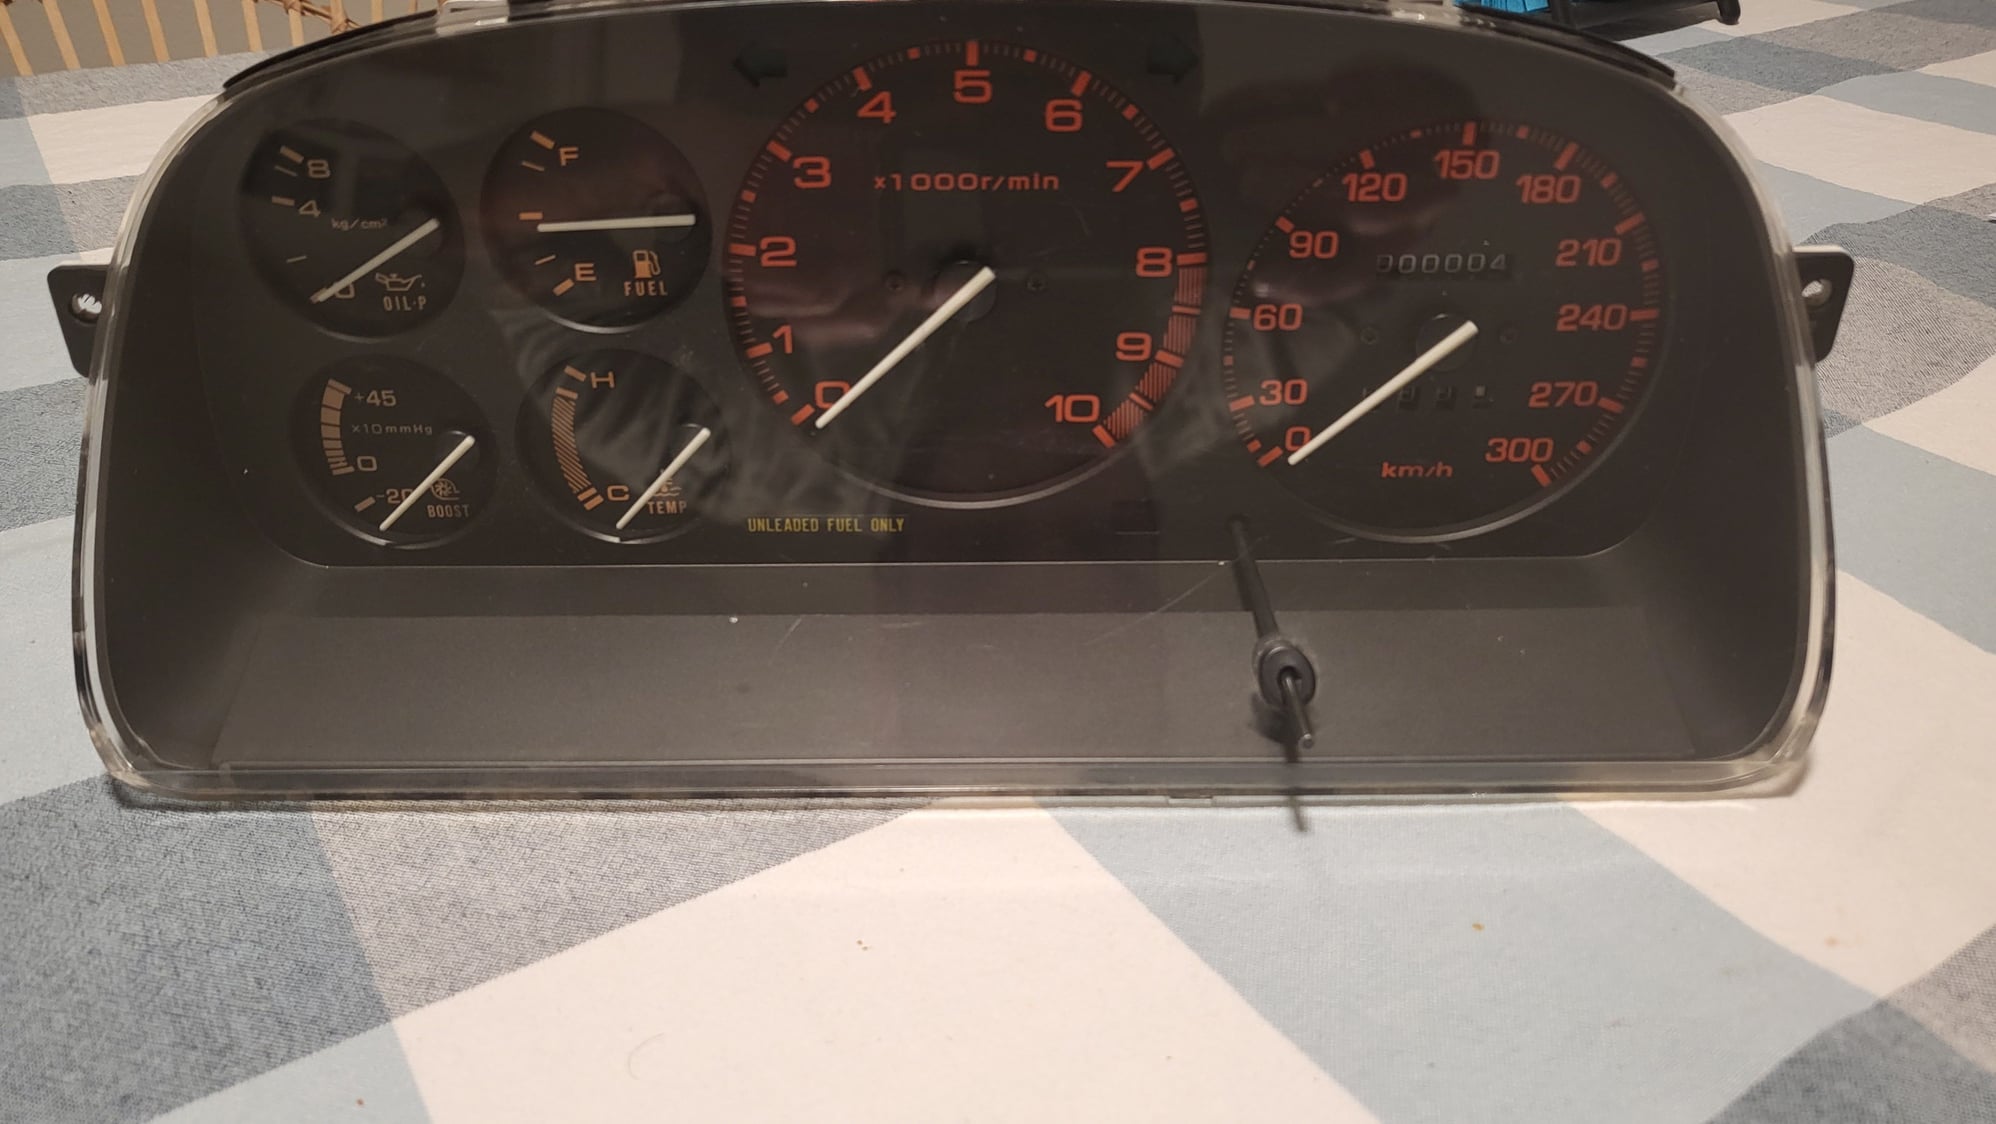 Interior/Upholstery - 10k RPM, 300 KM/HR S5 Gauge Cluster **Updated Listing** - Used - 1986 to 1991 Mazda RX-7 - Henderson, NV 89015, United States